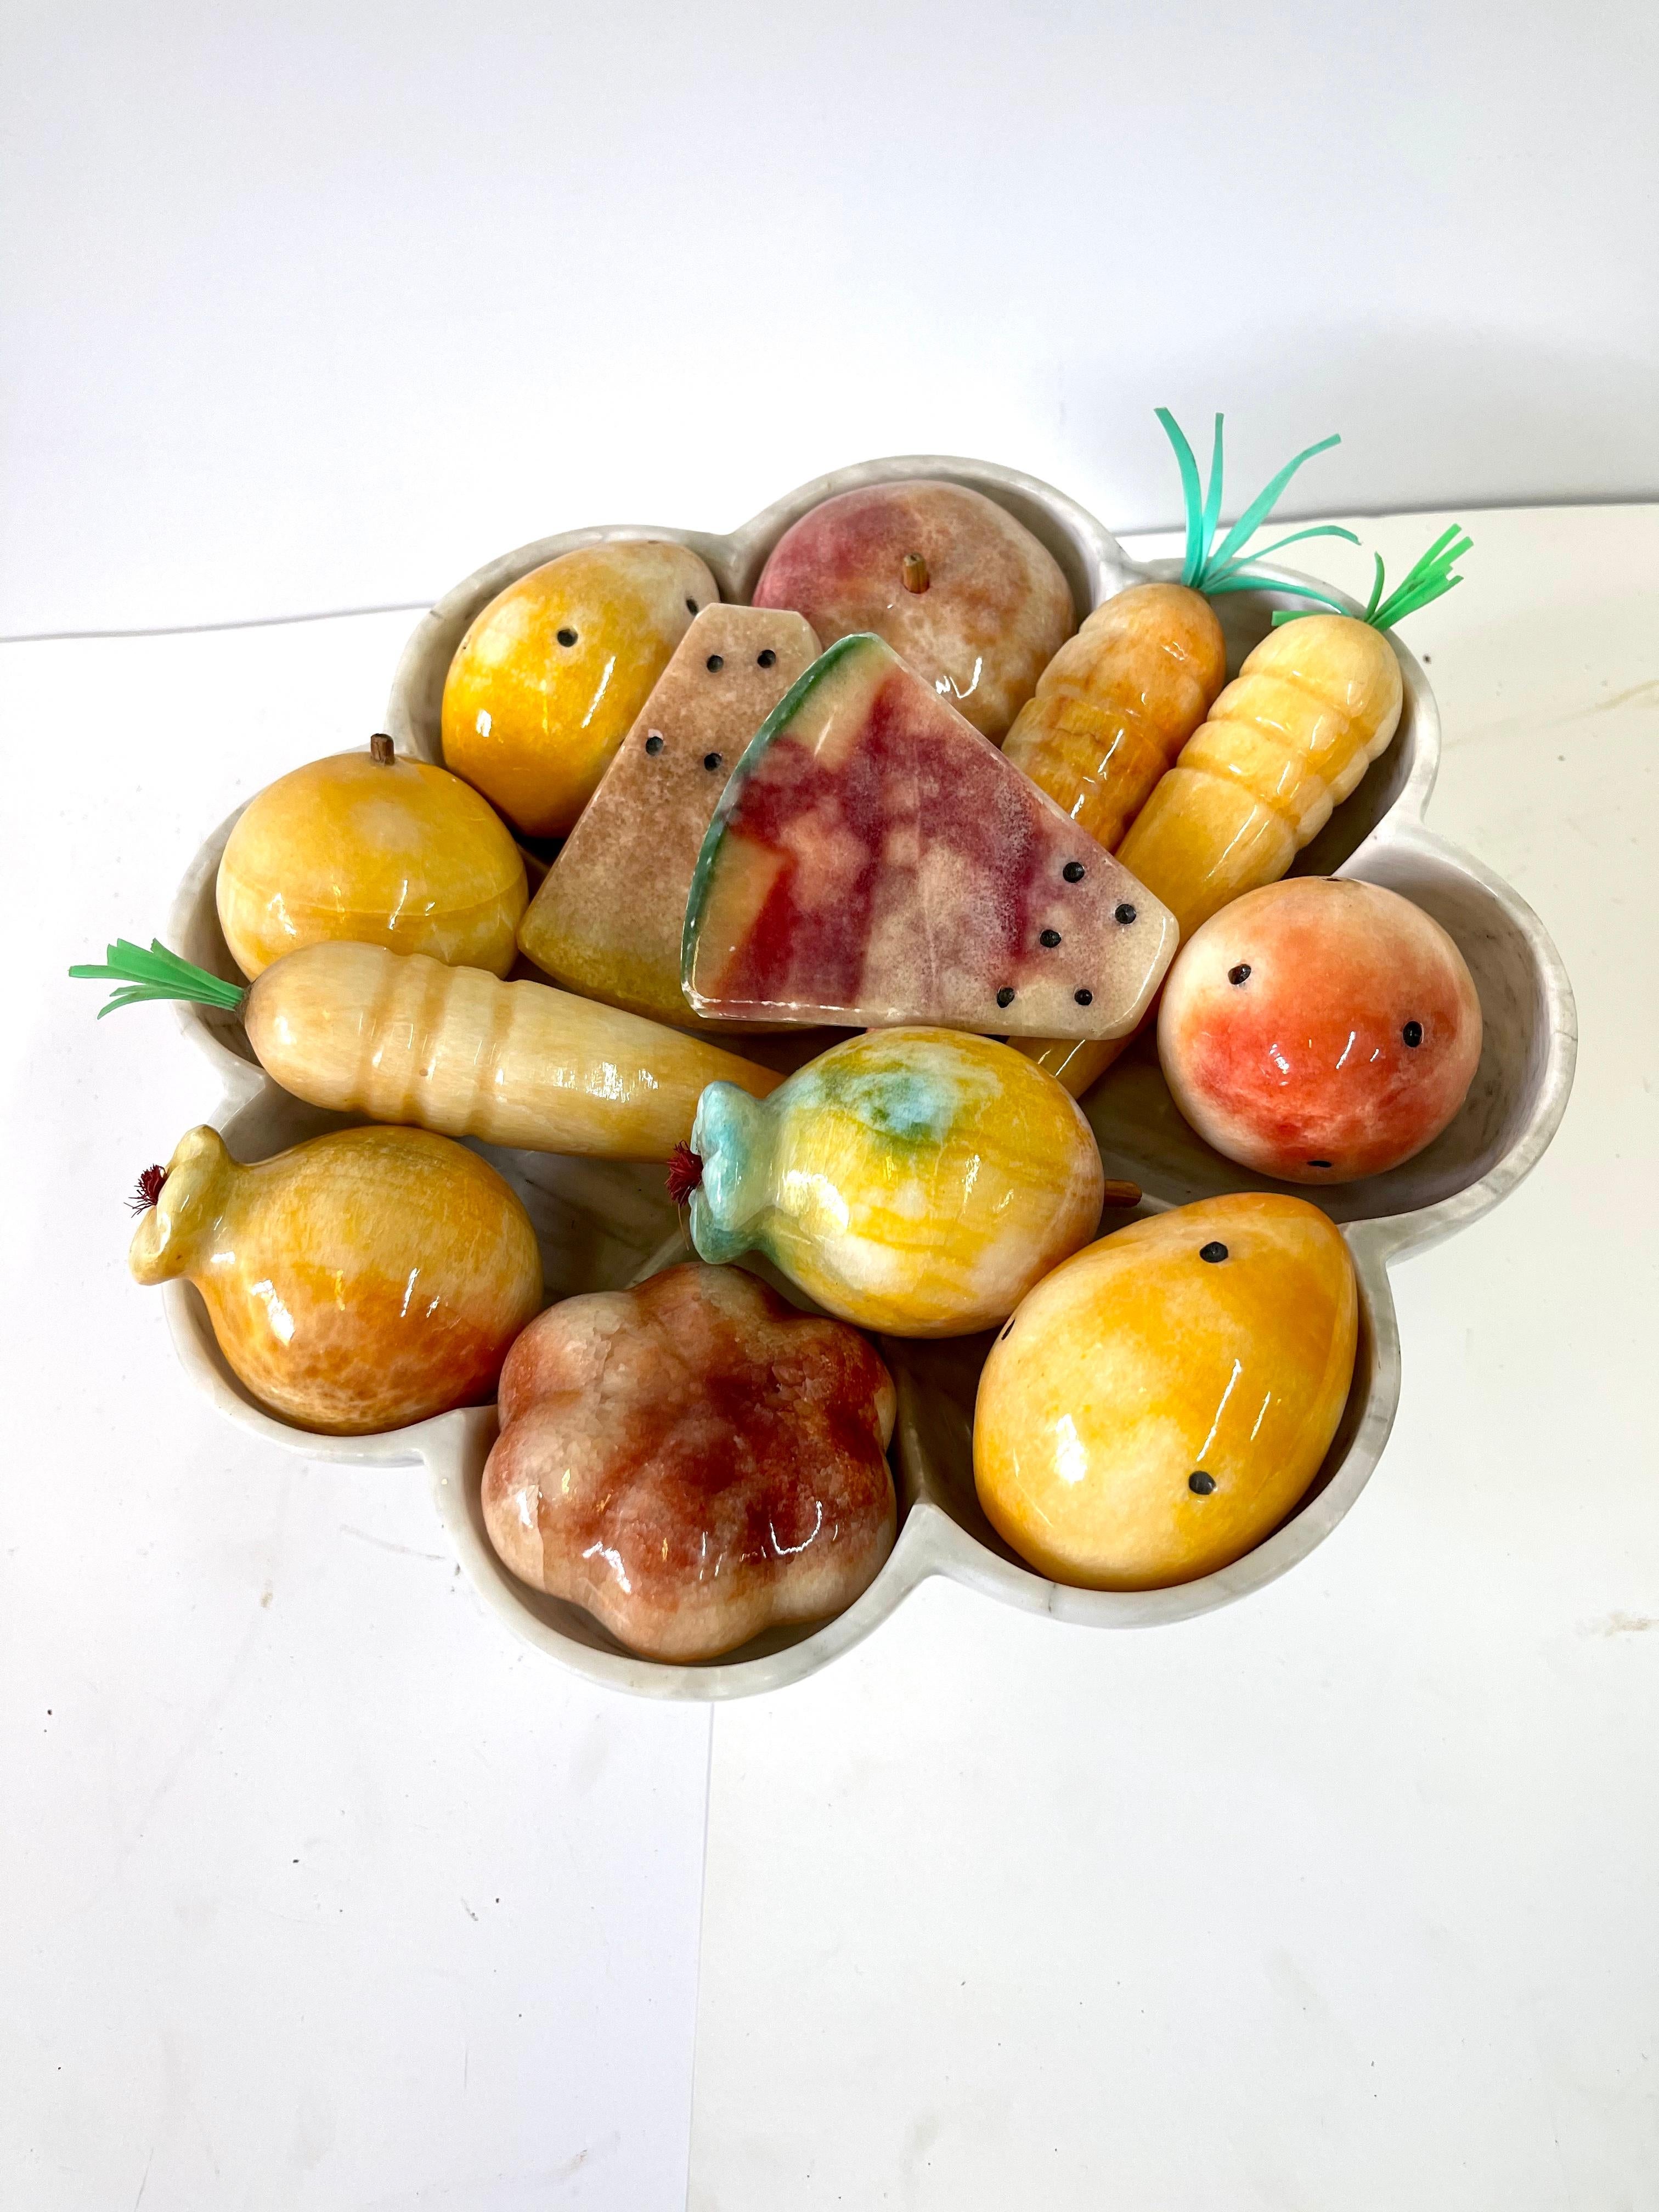 Vintage Italian Marble Tazza of Fruit and Vegetables 4